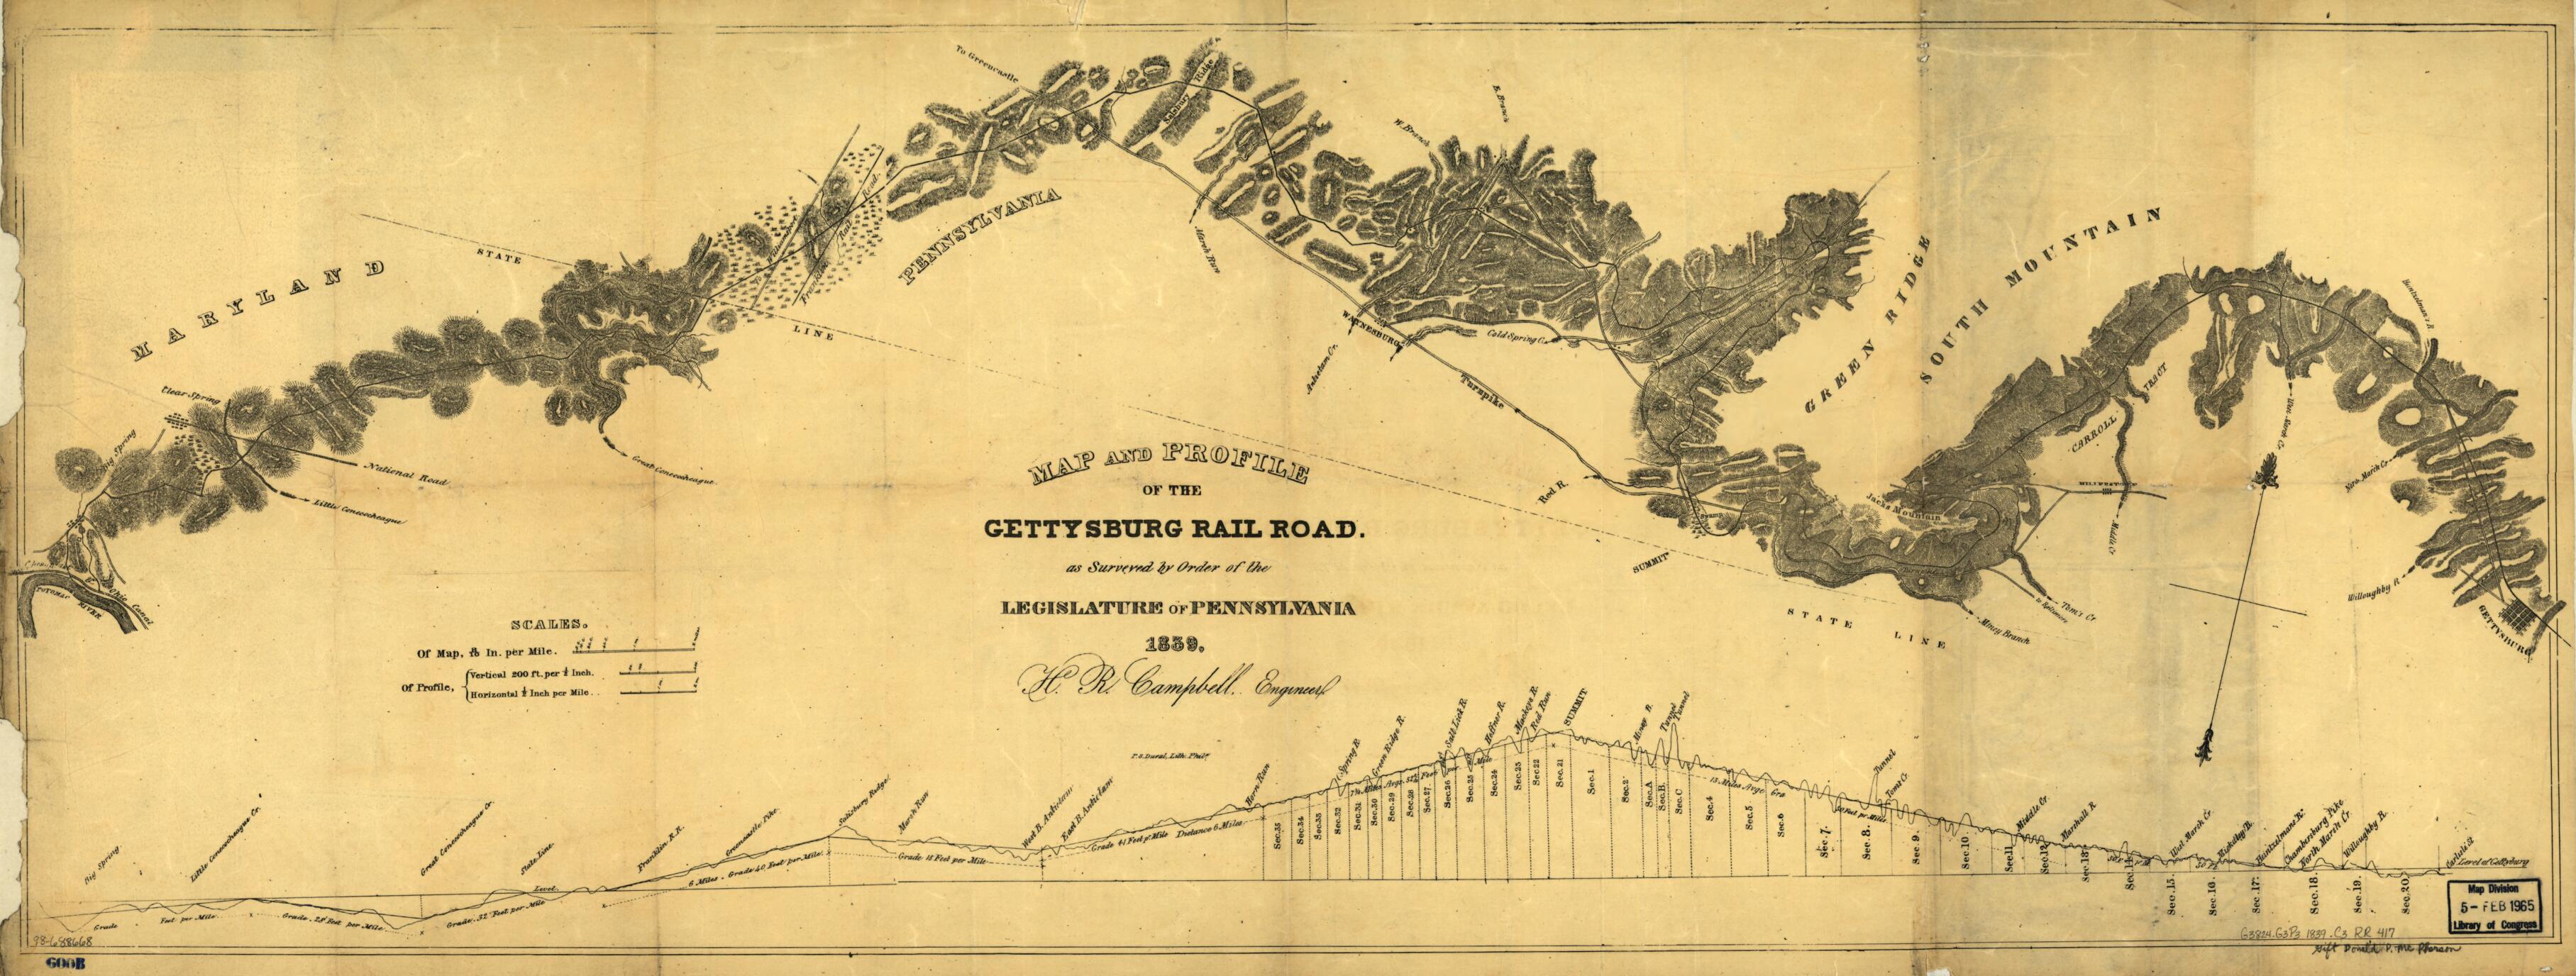 This old map of Map and Profile of the Gettysburg Rail Road As Surveyed by Order of the Legislature of Pennsylvania, from 1839 was created by Henry R. Campbell,  Gettysburg Railroad in 1839